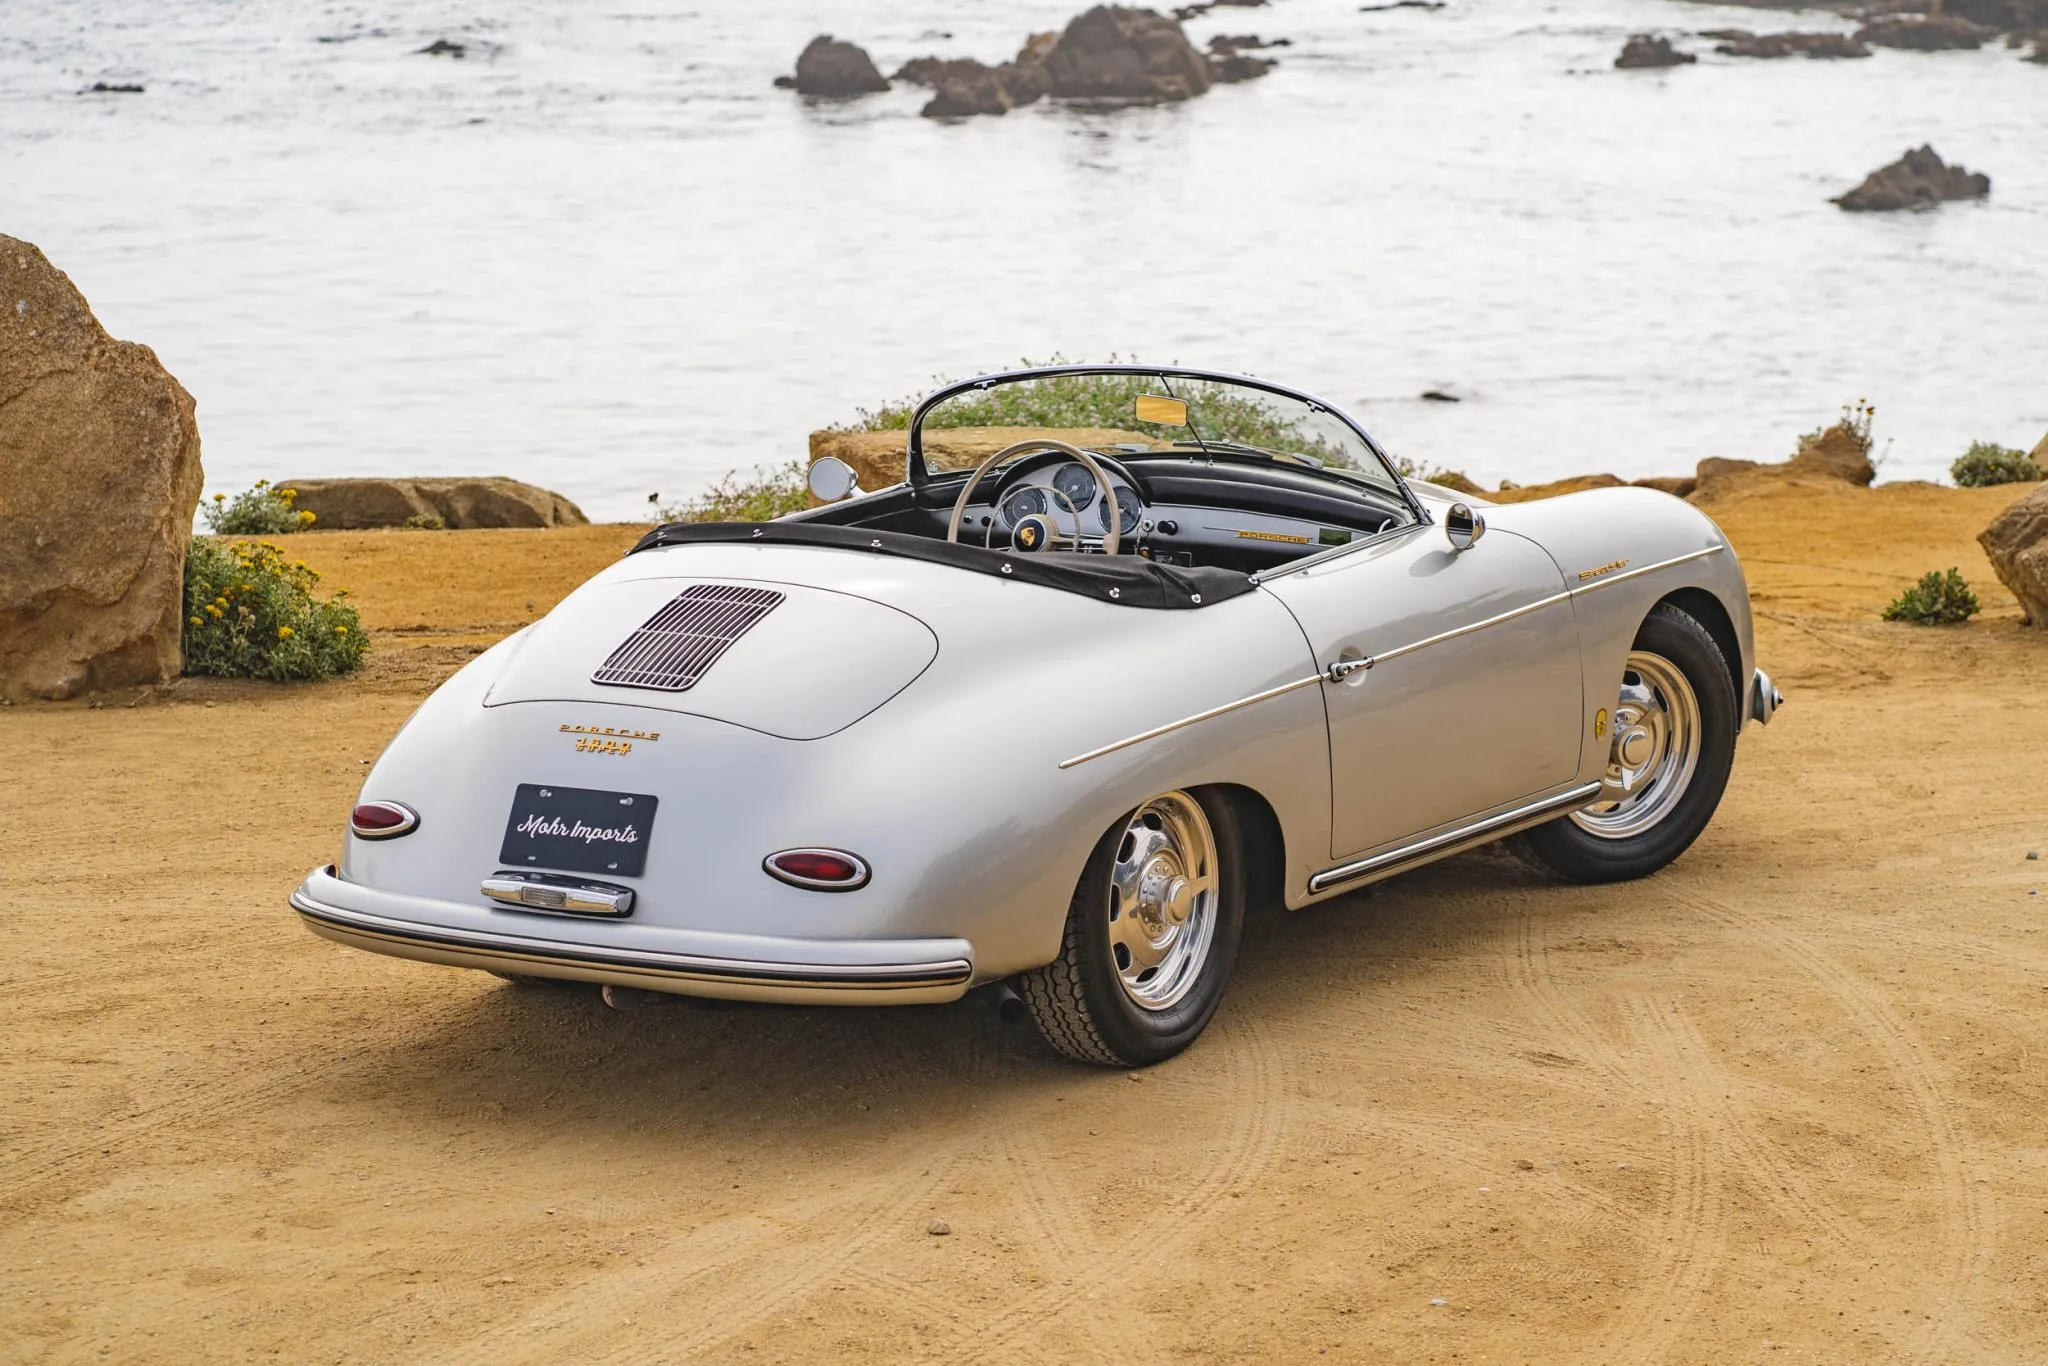 This 37K-Mileage 1958 Porsche 356A Speedster Could Be Yours!